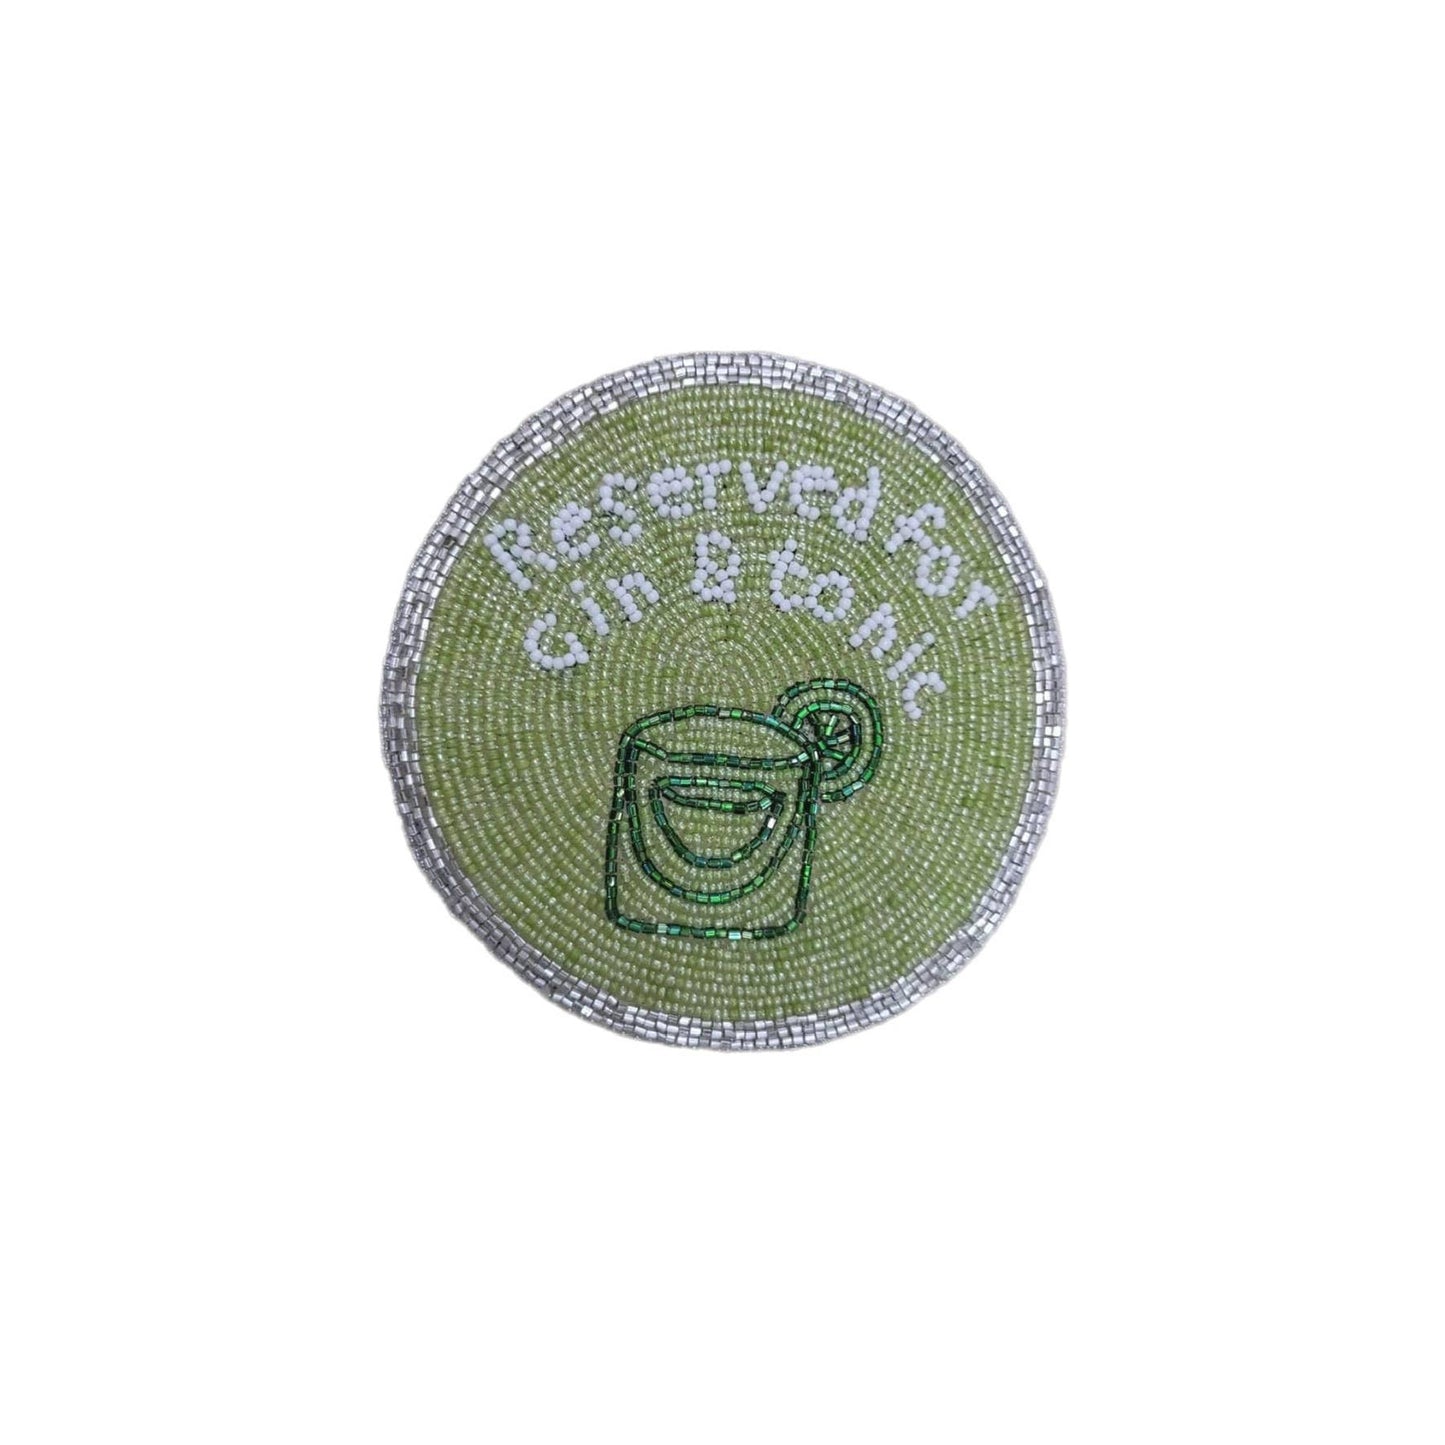 Reserved for Gin & Tonic Beaded Coaster